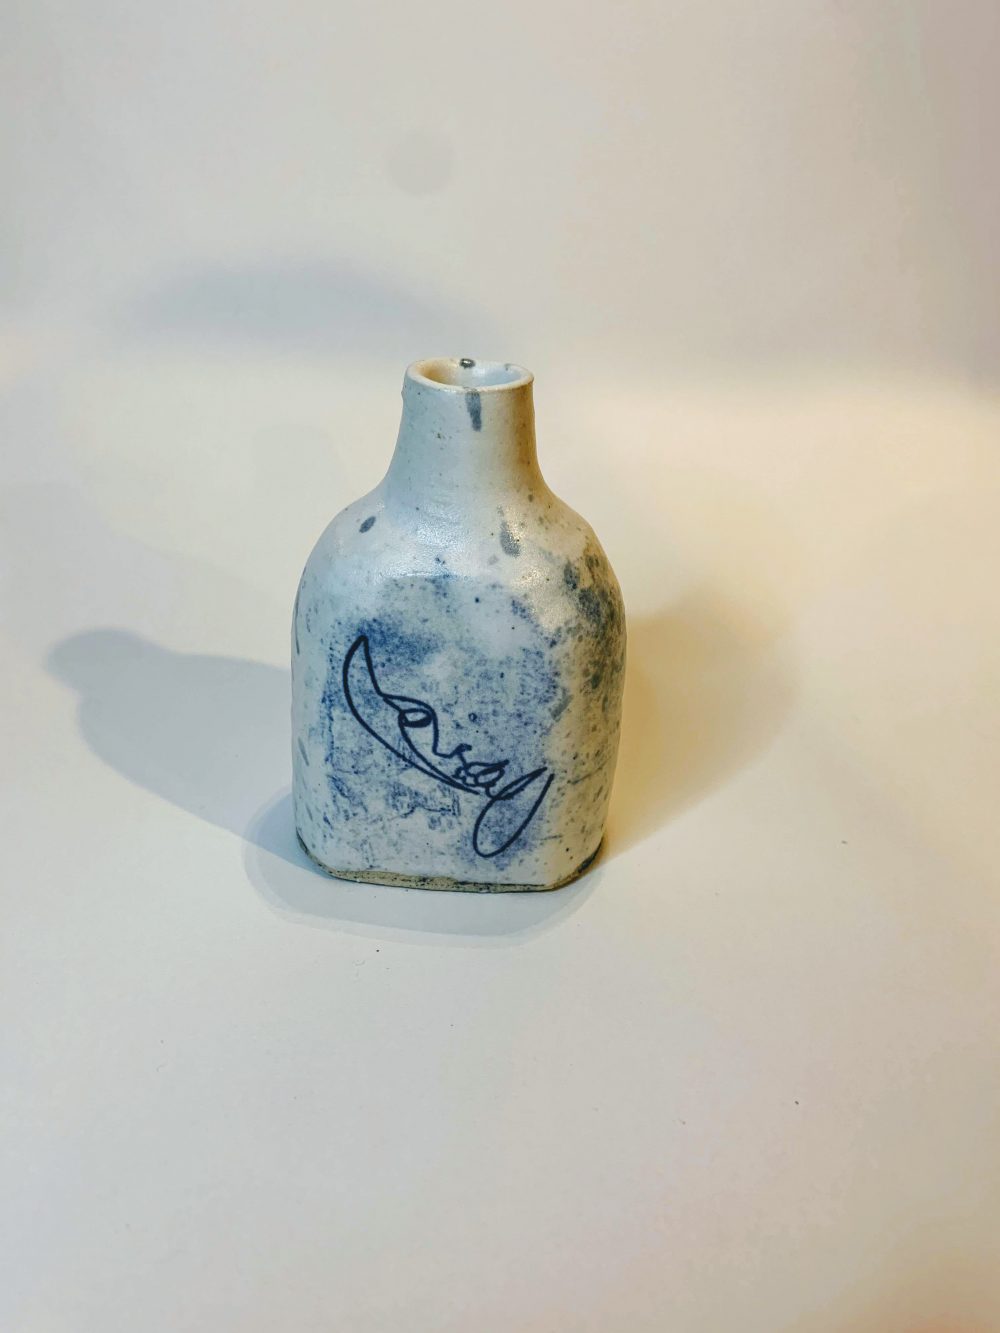 Shania Sweet, The Woman in the Bottle, 2020, wheel throwing clay, glaze, and laser glaze etching, 3.5 "x 2.5" x 1.75"